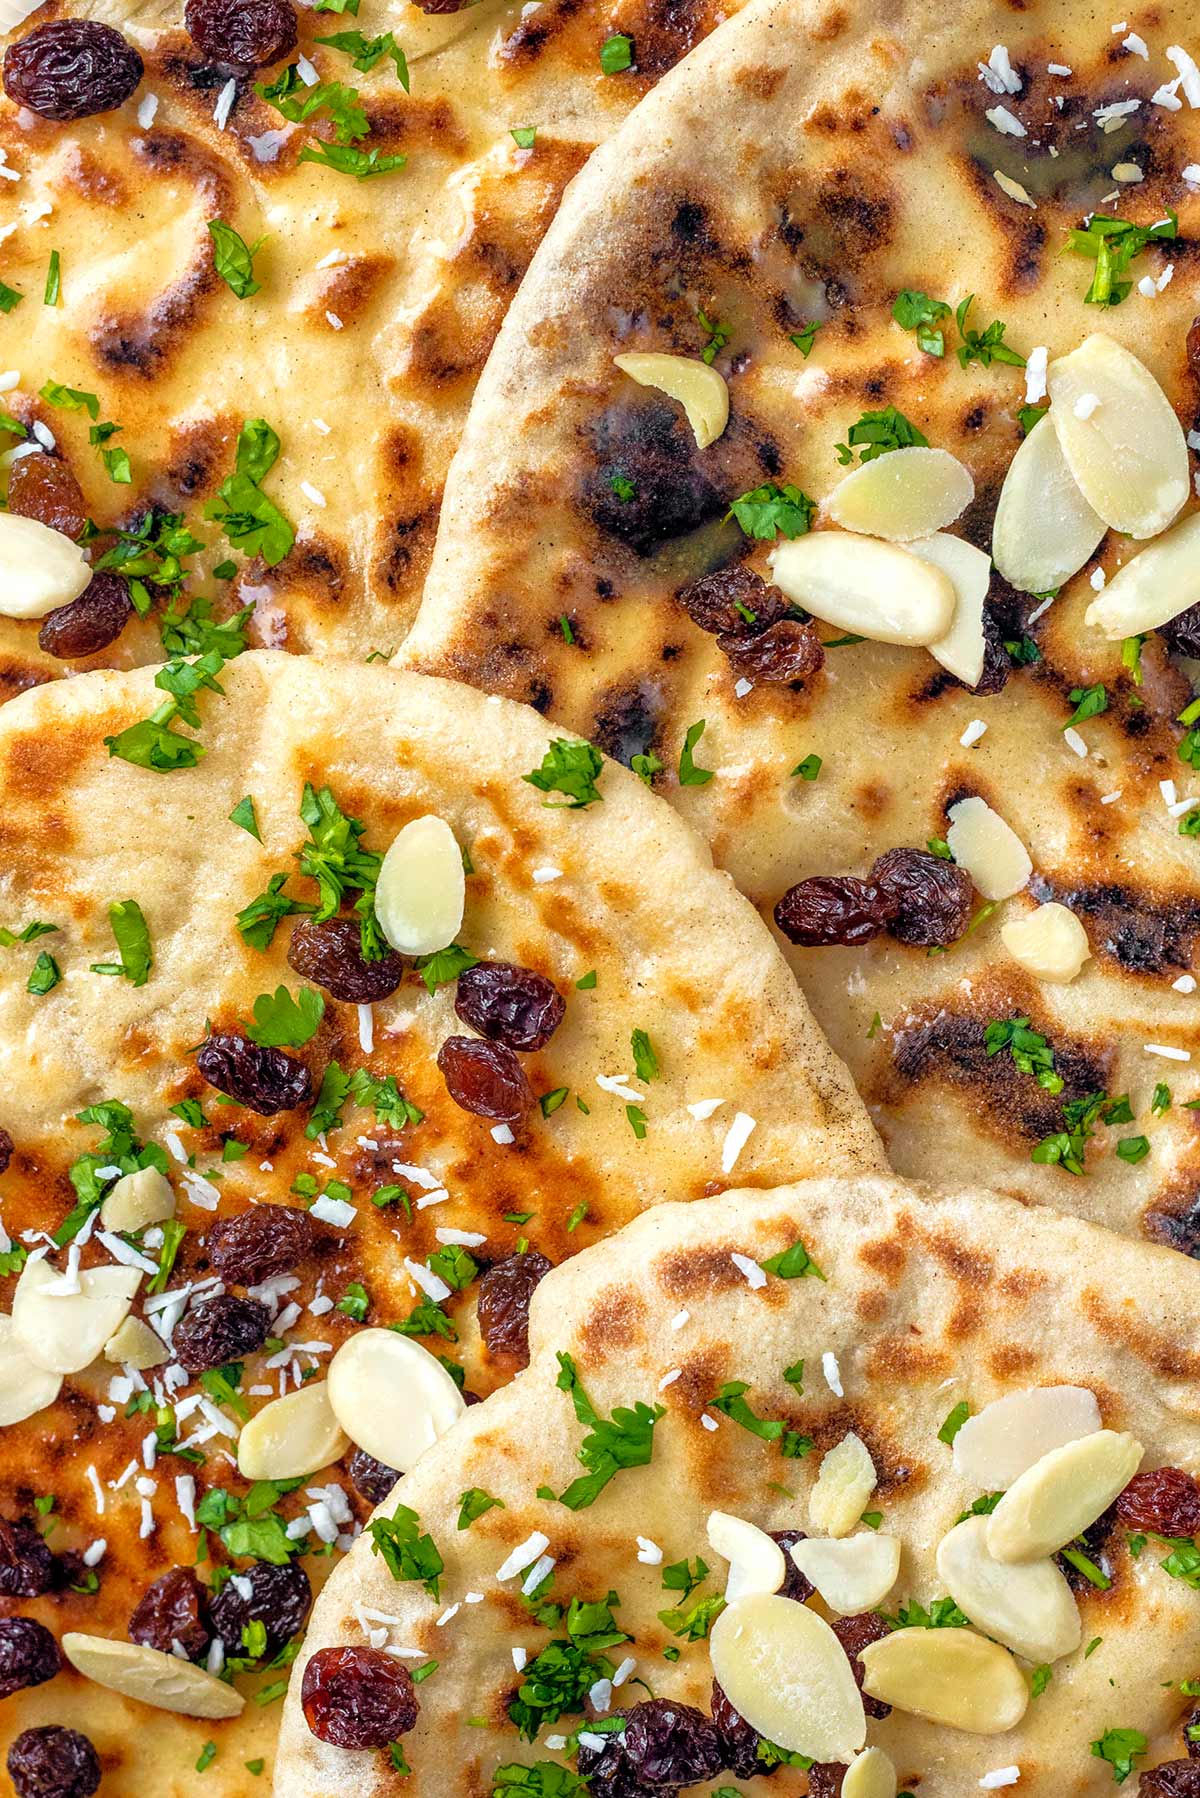 Naan breads on top of each other topped with raisins, flaked almonds and chopped coriander leaves.